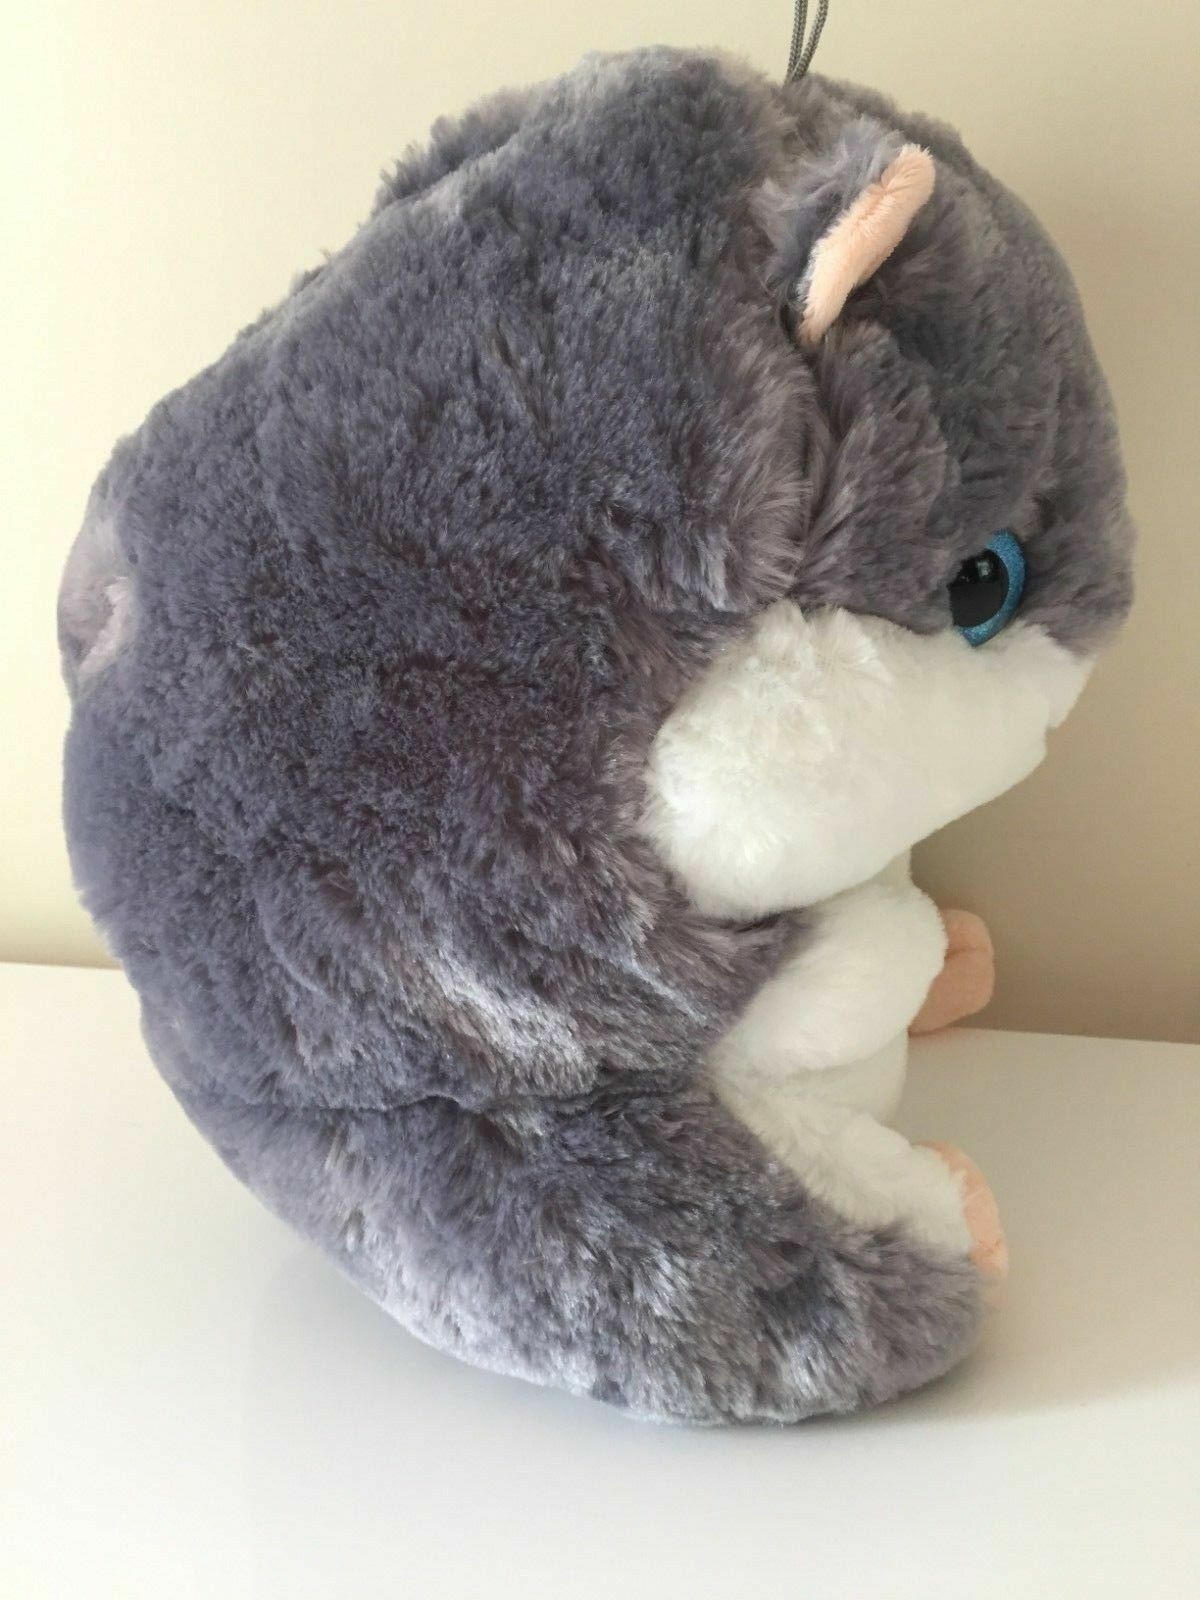 Primary image for LARGE HAMSTER 13 INCH TALL. SOFT GREY PILLOW PLUSH TOY BY NANCO. NEW